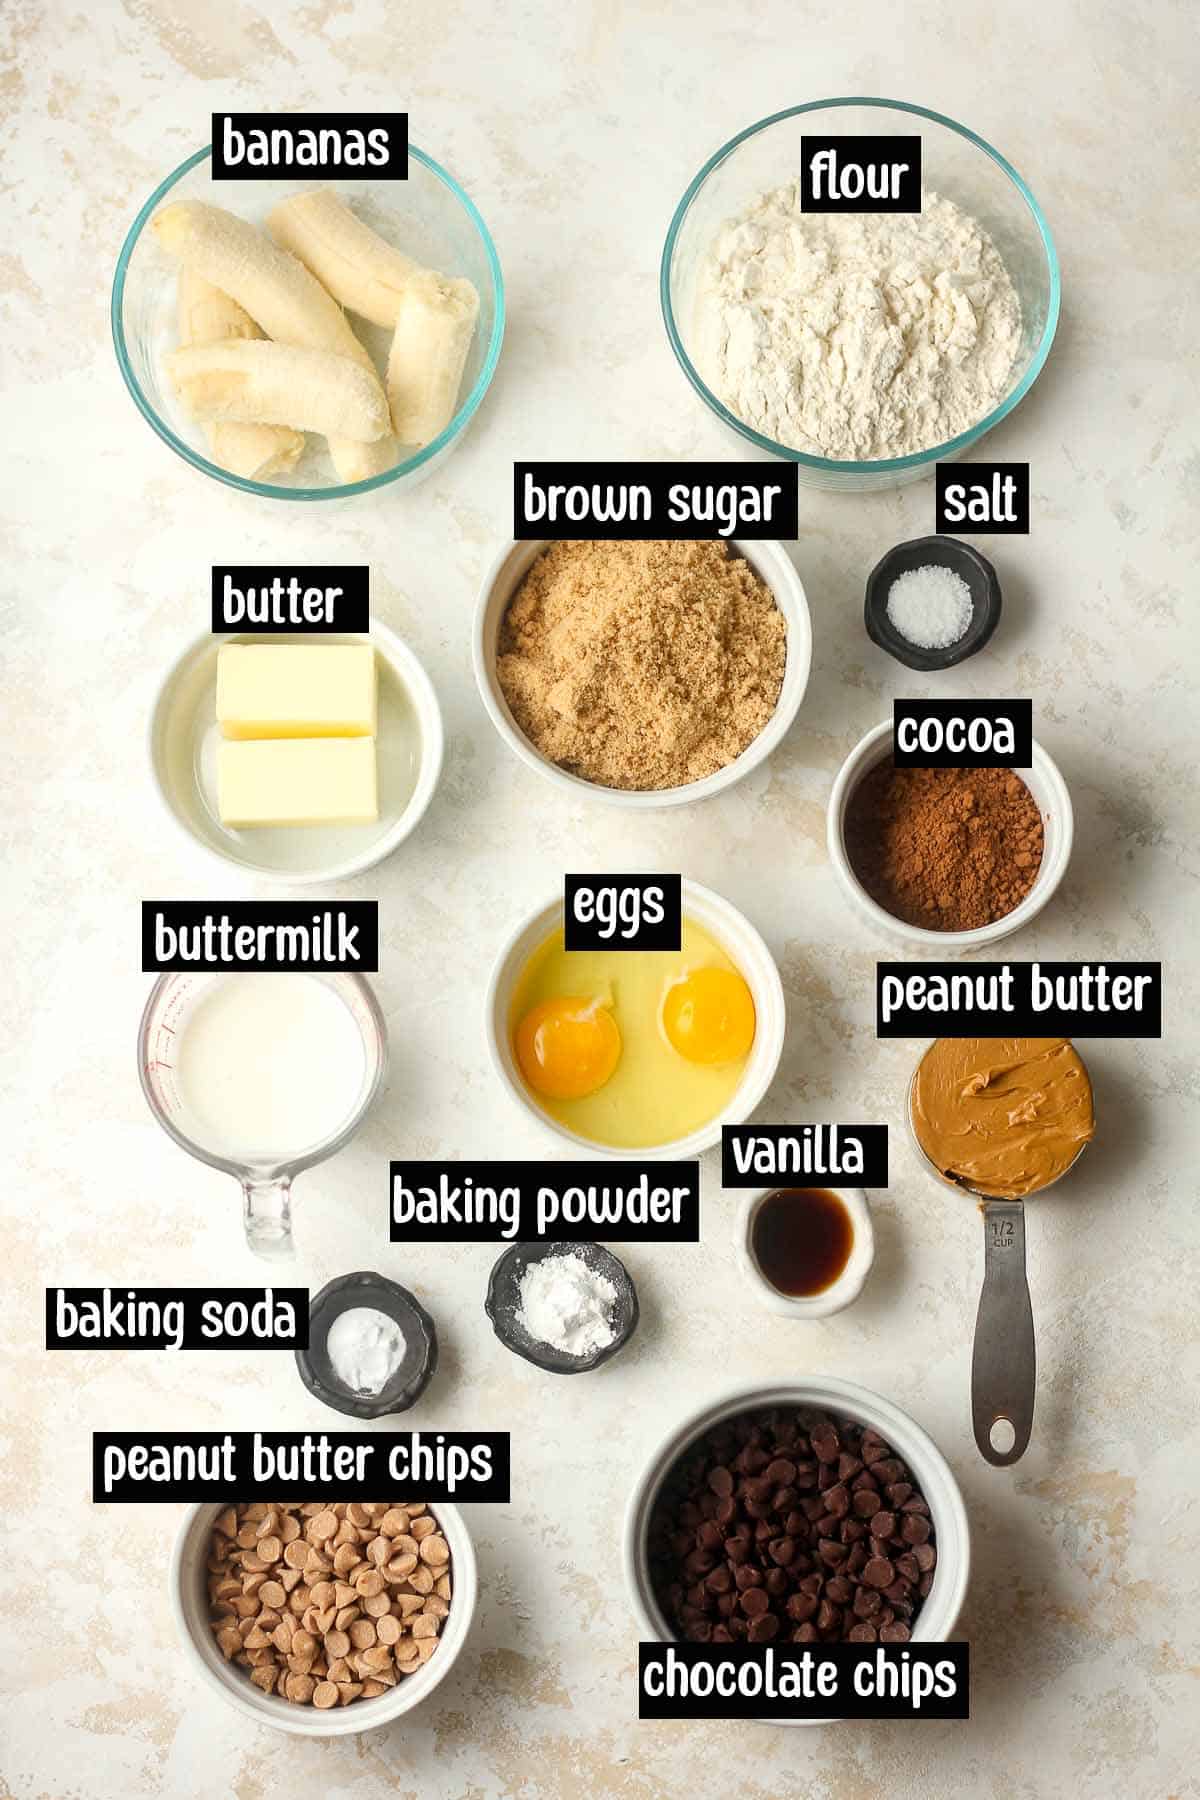 The ingredients for the muffins, with labels.